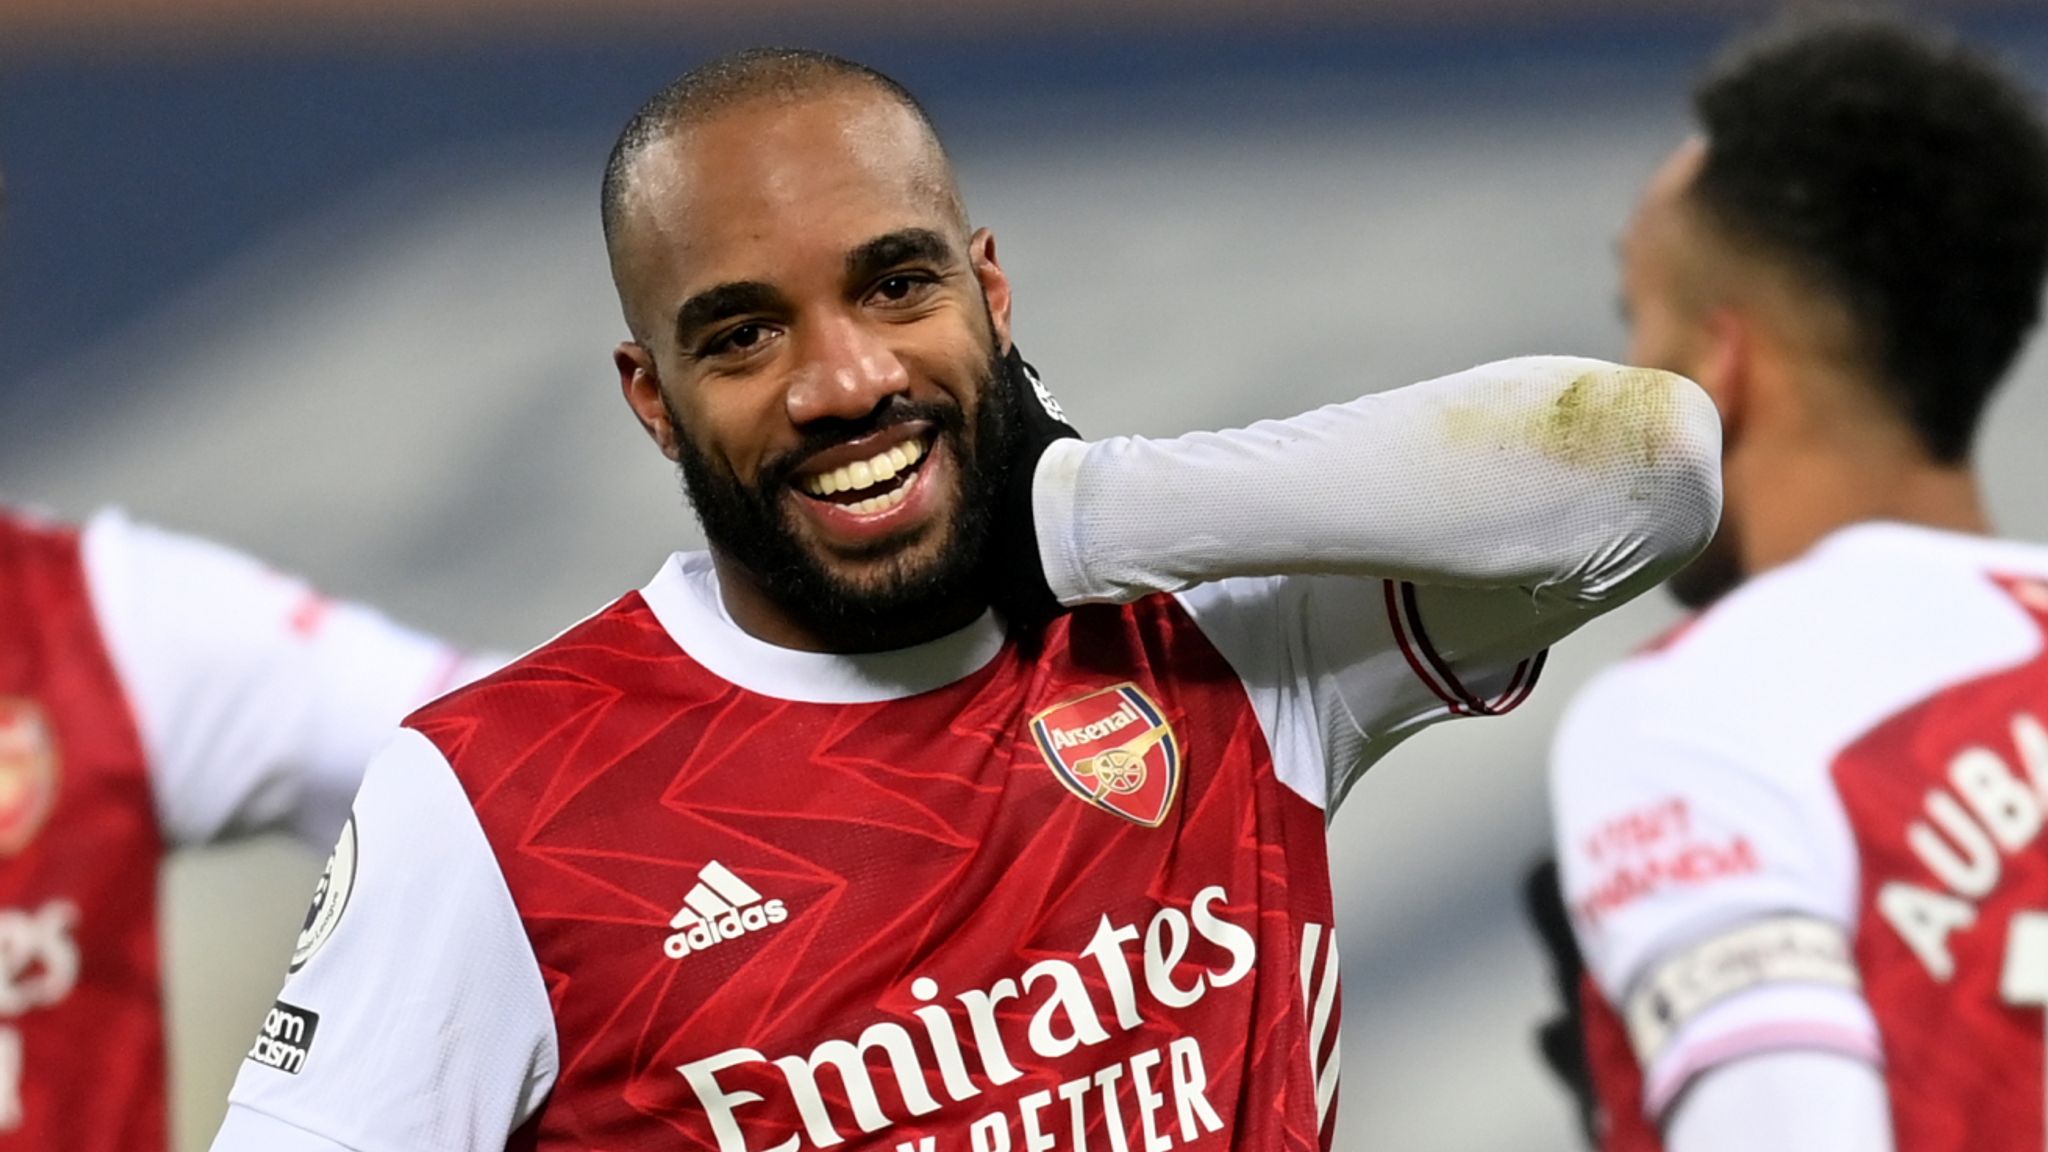 Lacazette scores twice as Arsenal beat West Brom 4-0